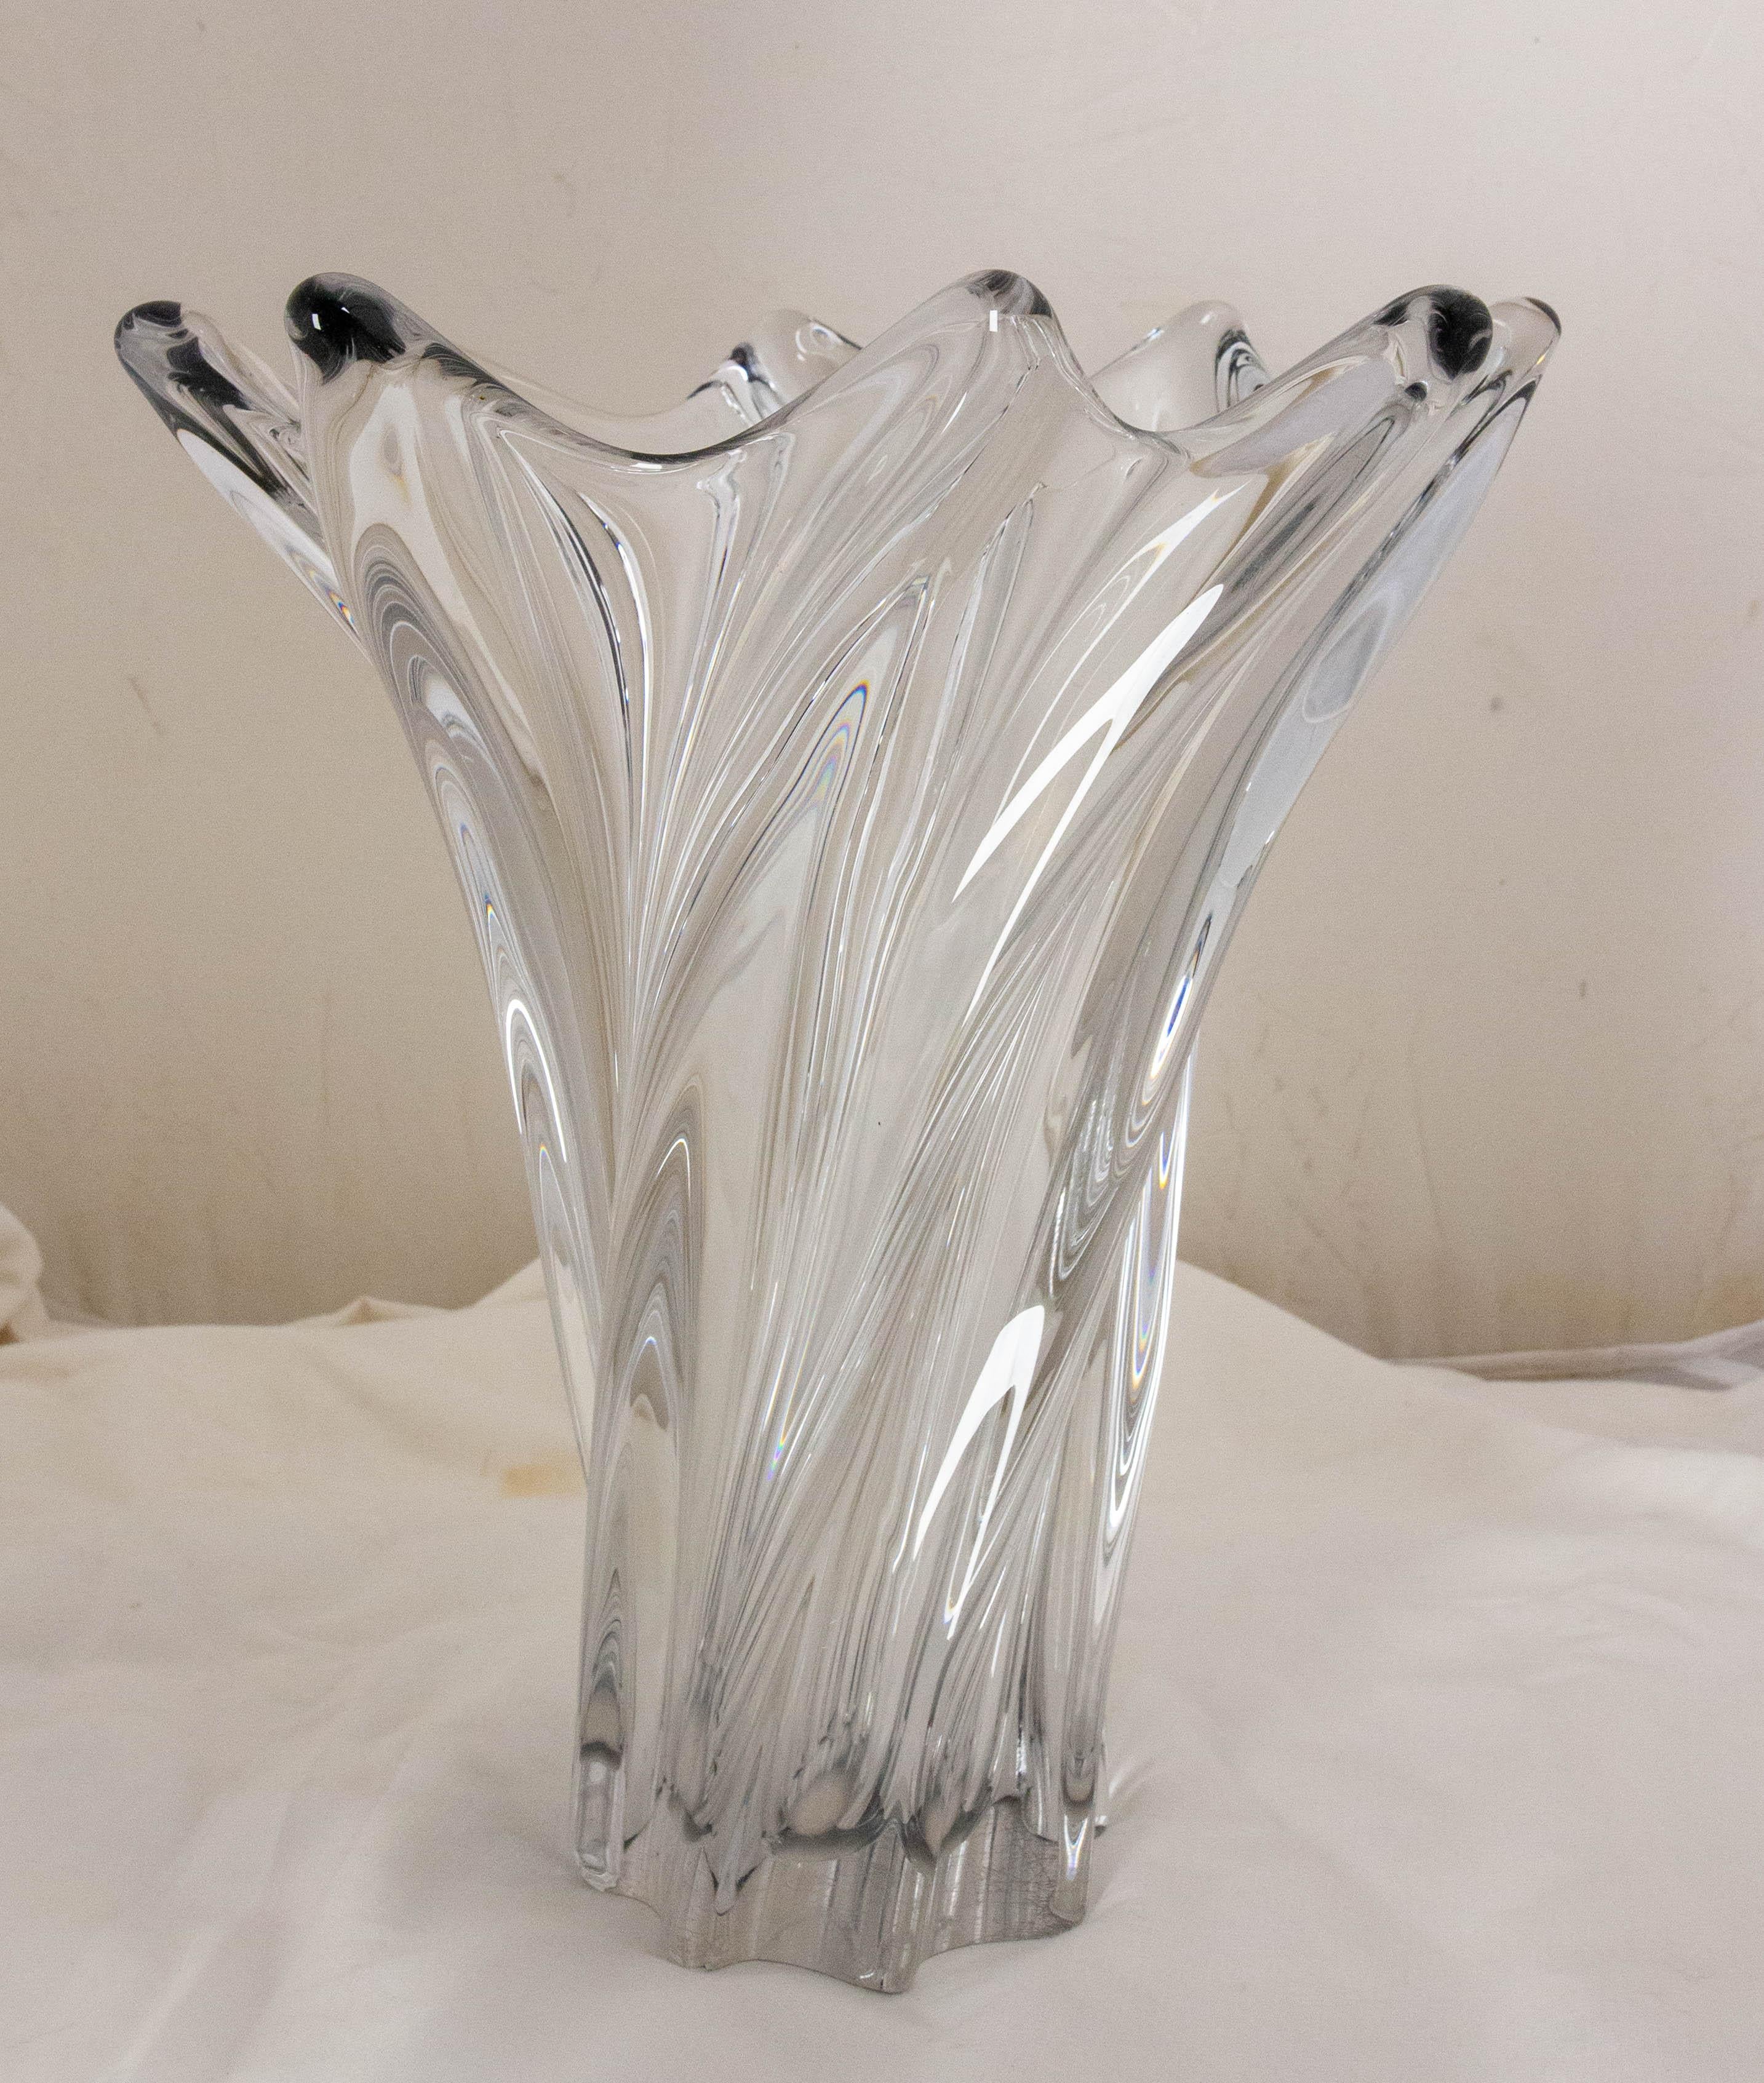 Crystal vase circa 1960, France.
from Vianne manufactures in the South-West of France.
Signed.
Please note that the quality and shape of the crystal give the impression that some parts of the collar are black. This is simply the result of the play